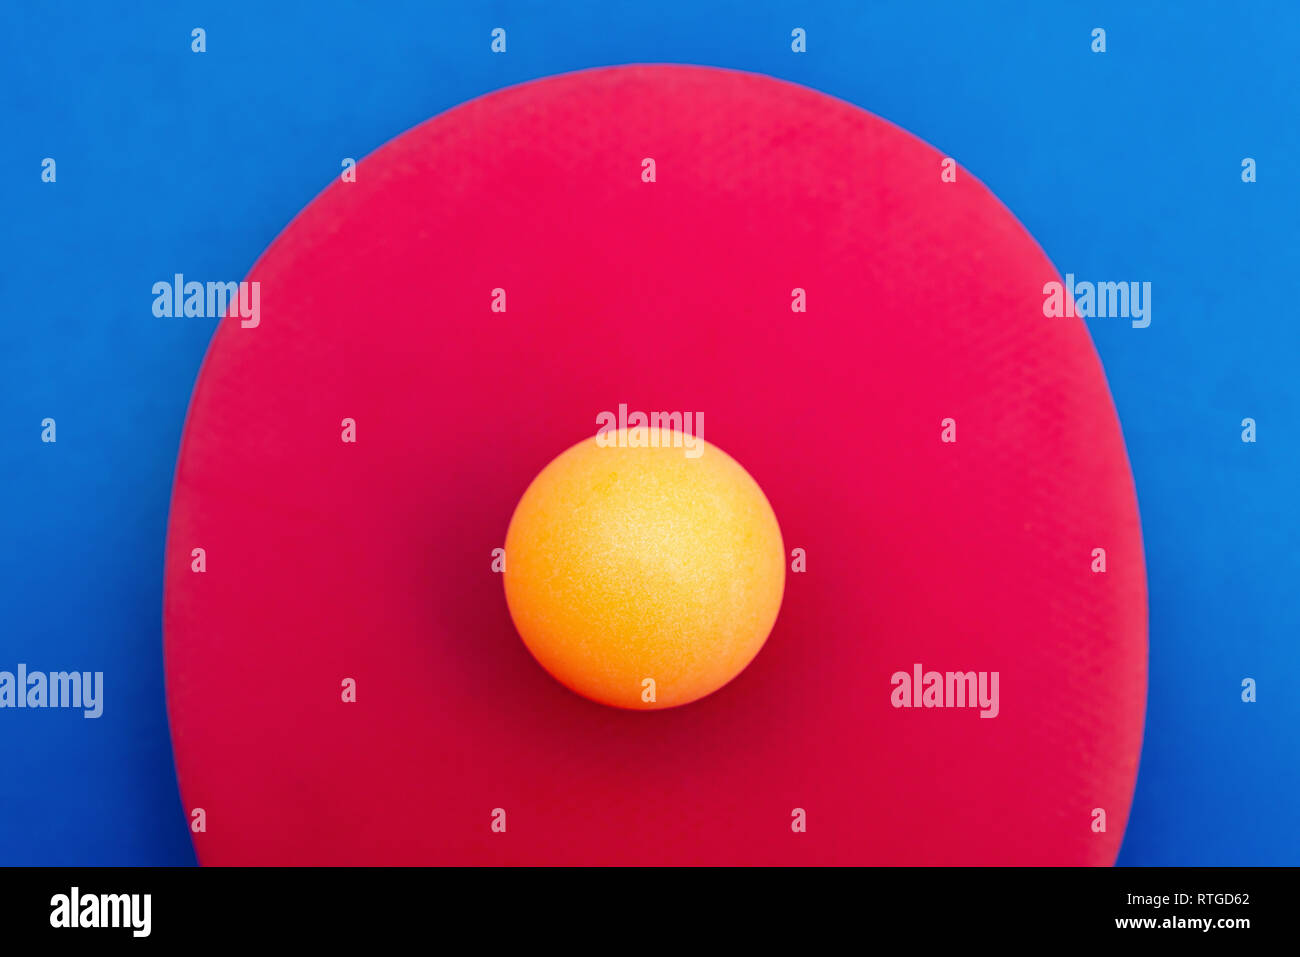 pingpong racket and ball on a blue background Stock Photo